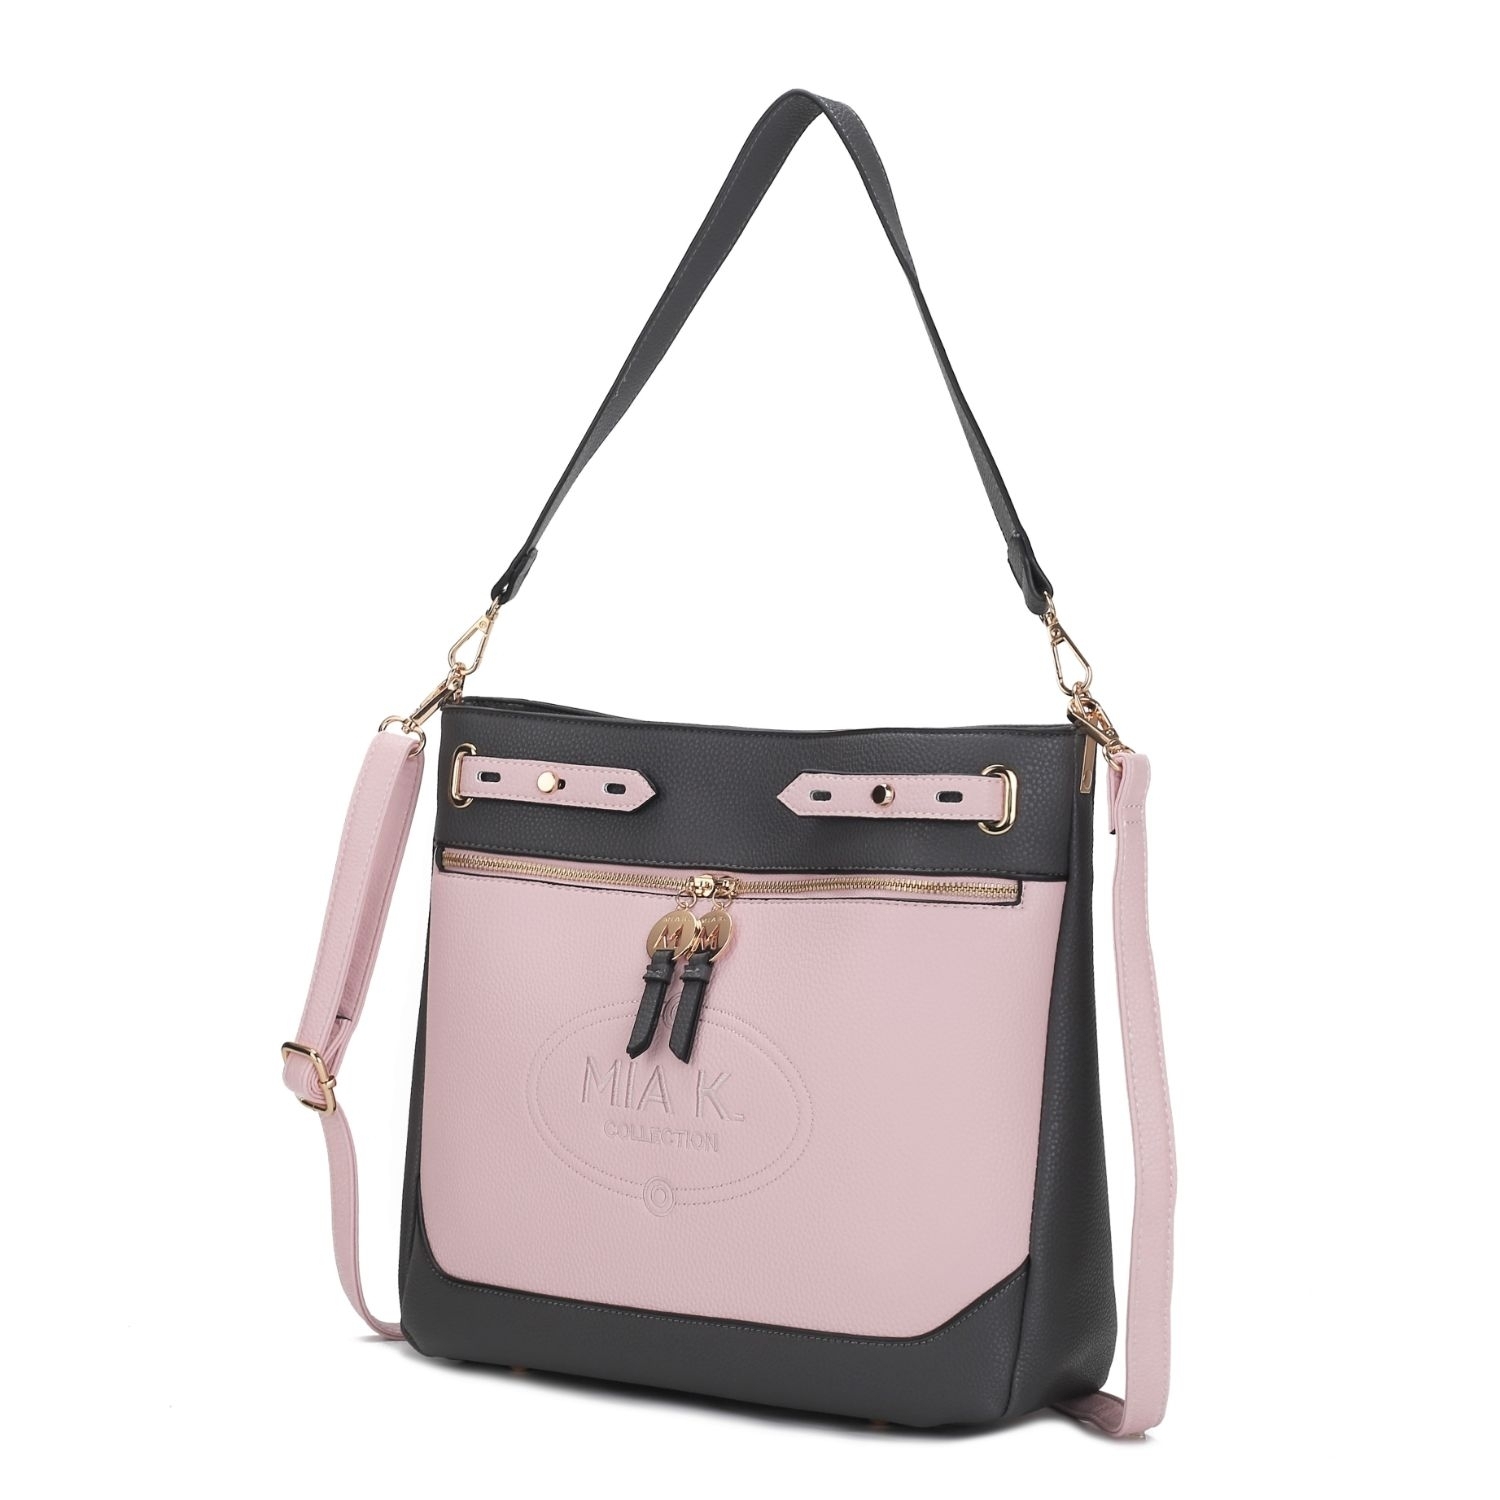 MKF Collection Evie Two-tone Vegan Leather Women's Shoulder Bag By Mia K. - Charcoal-pink